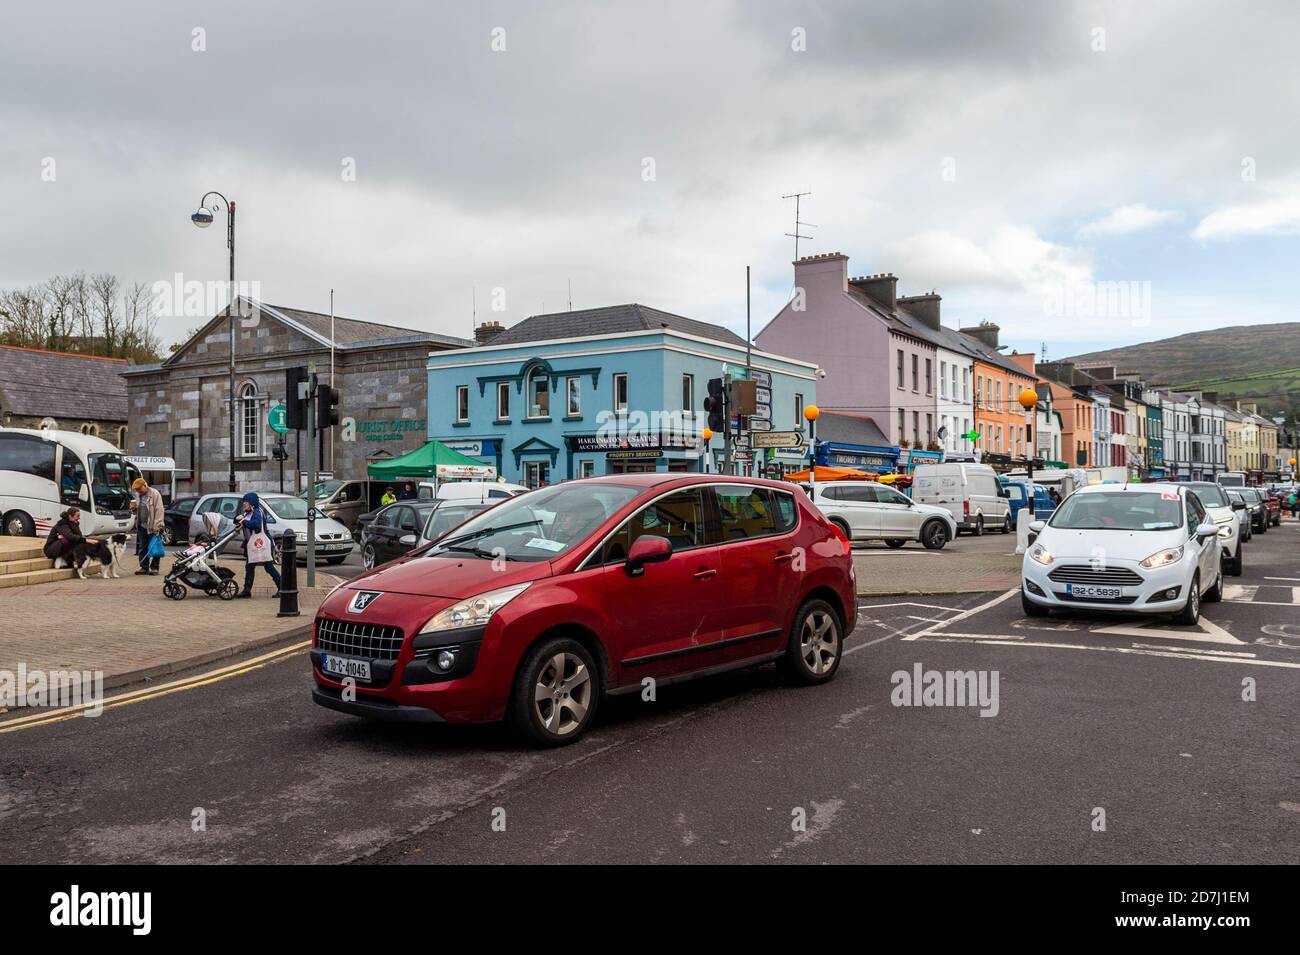 Bantry, West Cork, Ireland. 23rd Oct, 2020. Bantry Friday Market is operating today and is quieter than usual. However, traffic in and around Bantry was backed up with long lines of cars. Credit: AG News/Alamy Live News Stock Photo